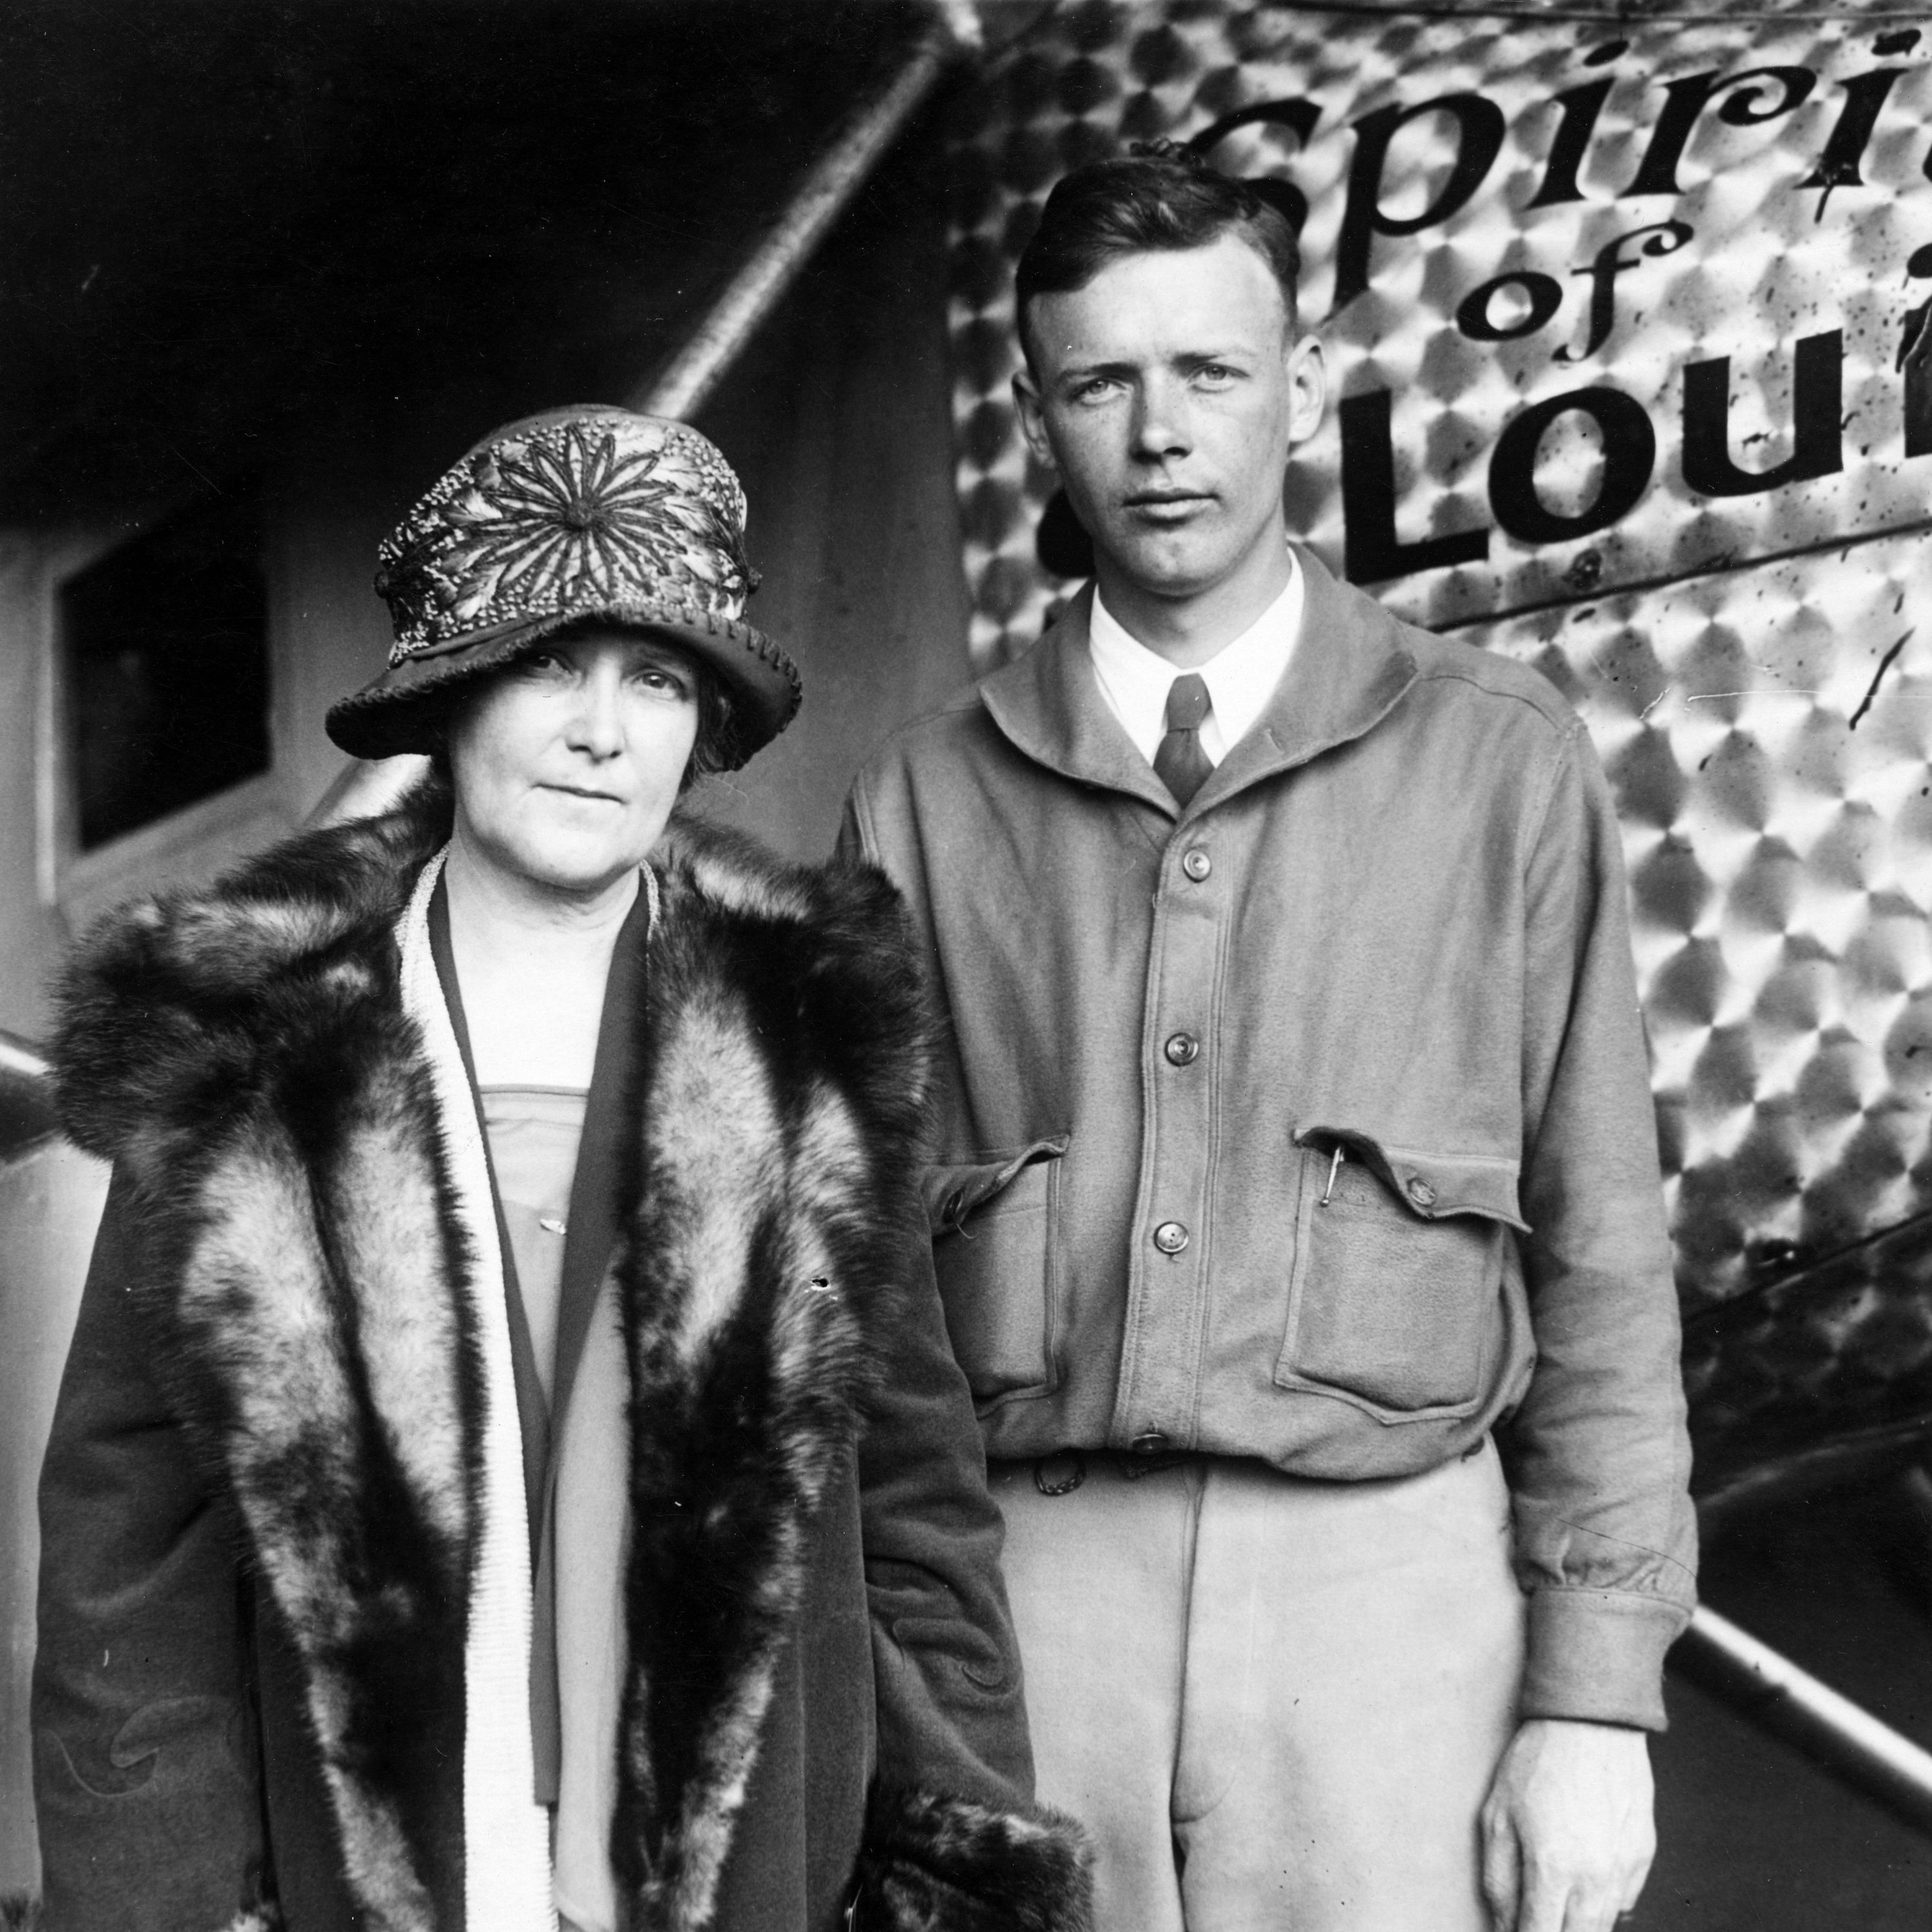 Sure, Charles Lindbergh was the most famous person alive. But did you know his mother was a pioneering Detroiter?